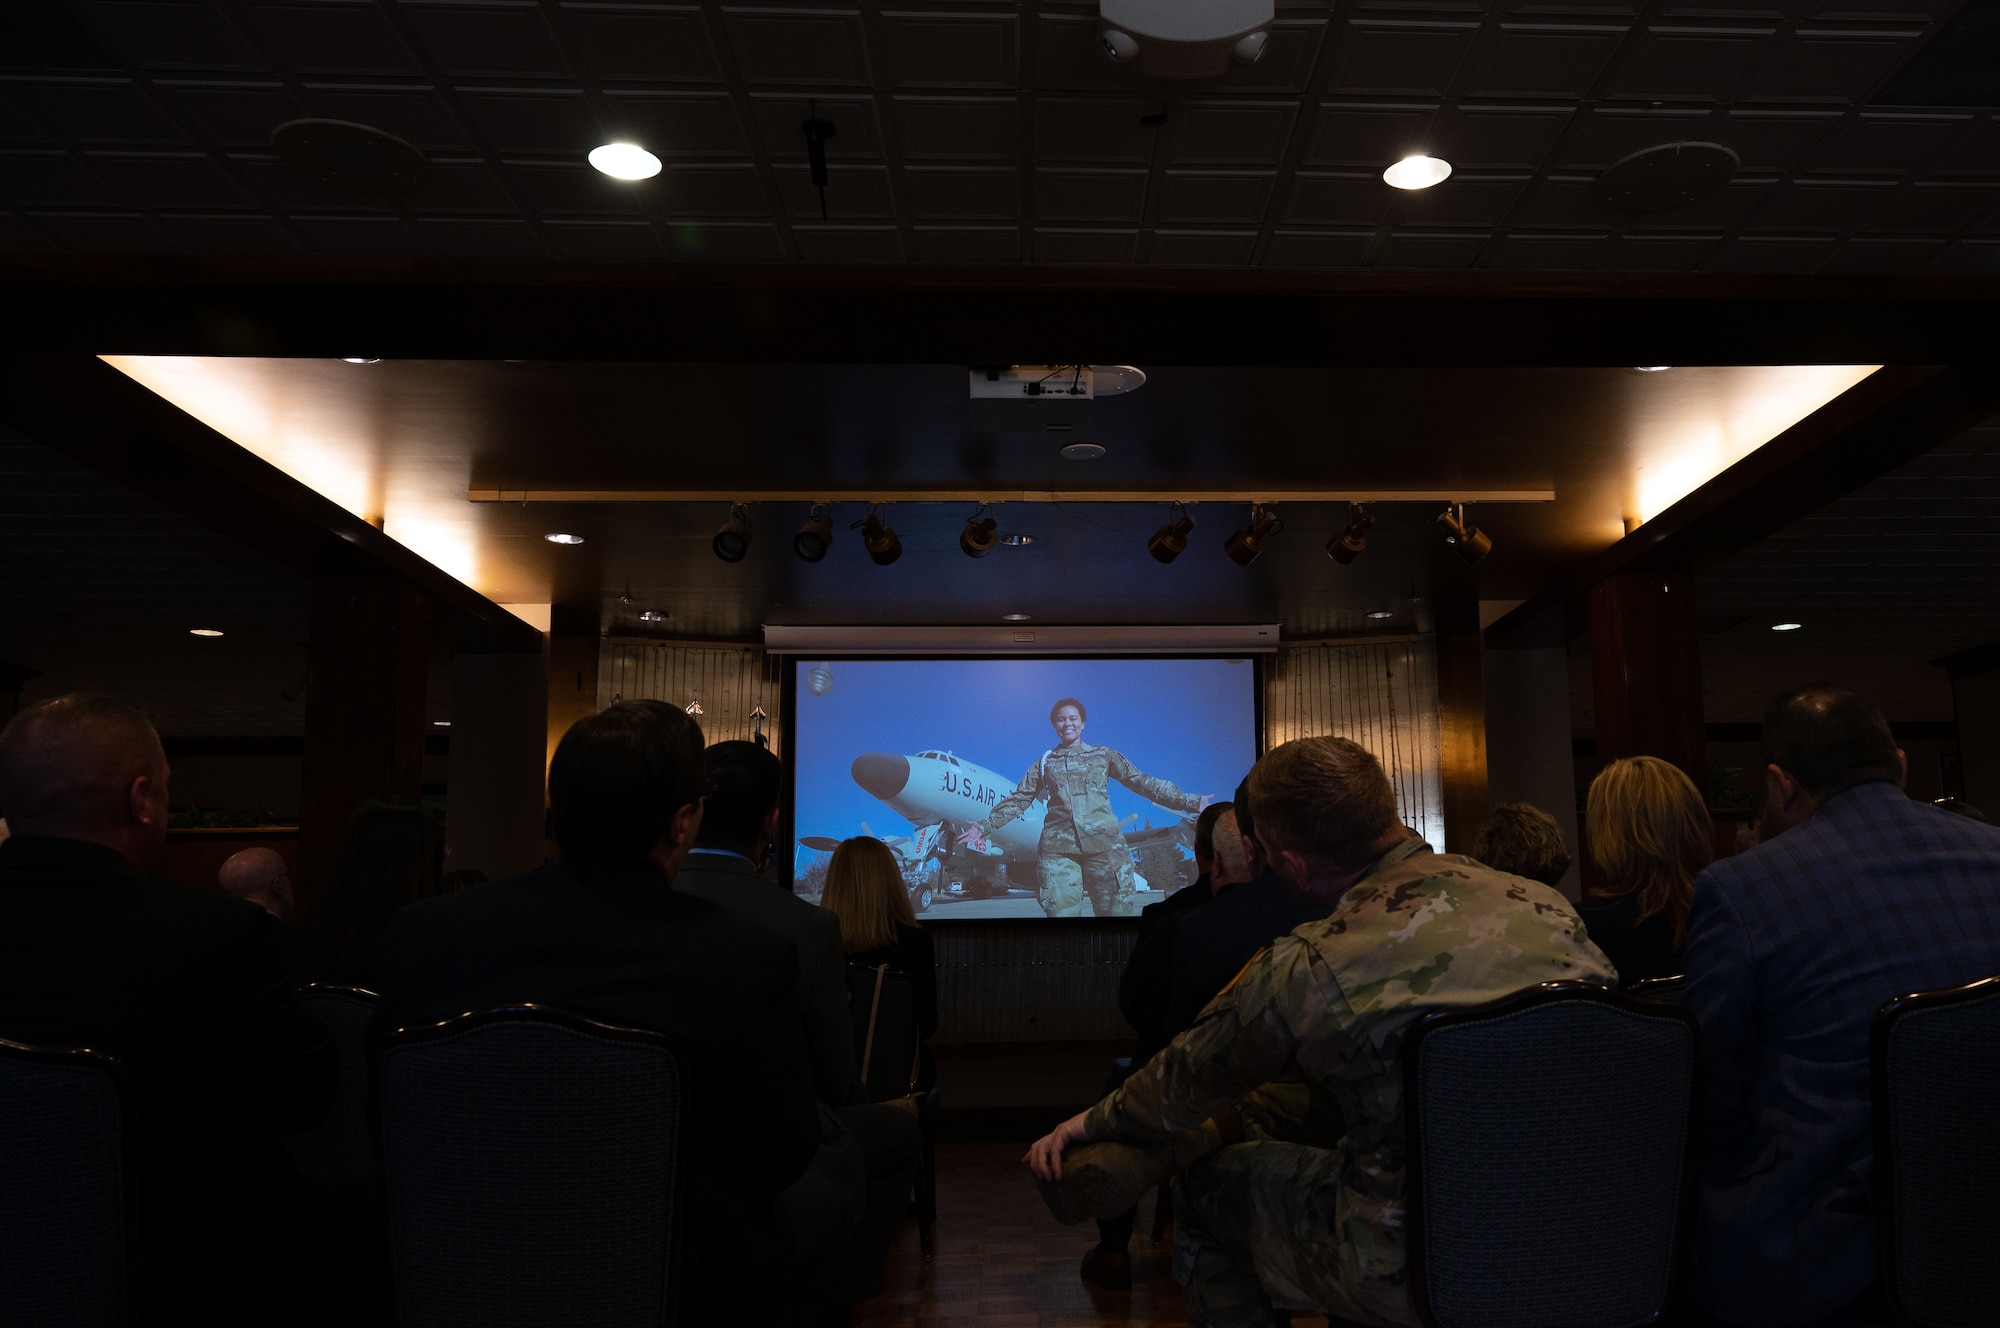 Space Base Delta 1 leadership and civic leaders watch the SBD 1 mission video before the State of the Bases address at Peterson Space Force Base, Colorado, March 22, 2023. The mission video showcases SBD 1's vision of being "One Team" and highlights its Airmen, Guardians and civilians. (U.S. Space Force photo by SrA Jared Bunn)